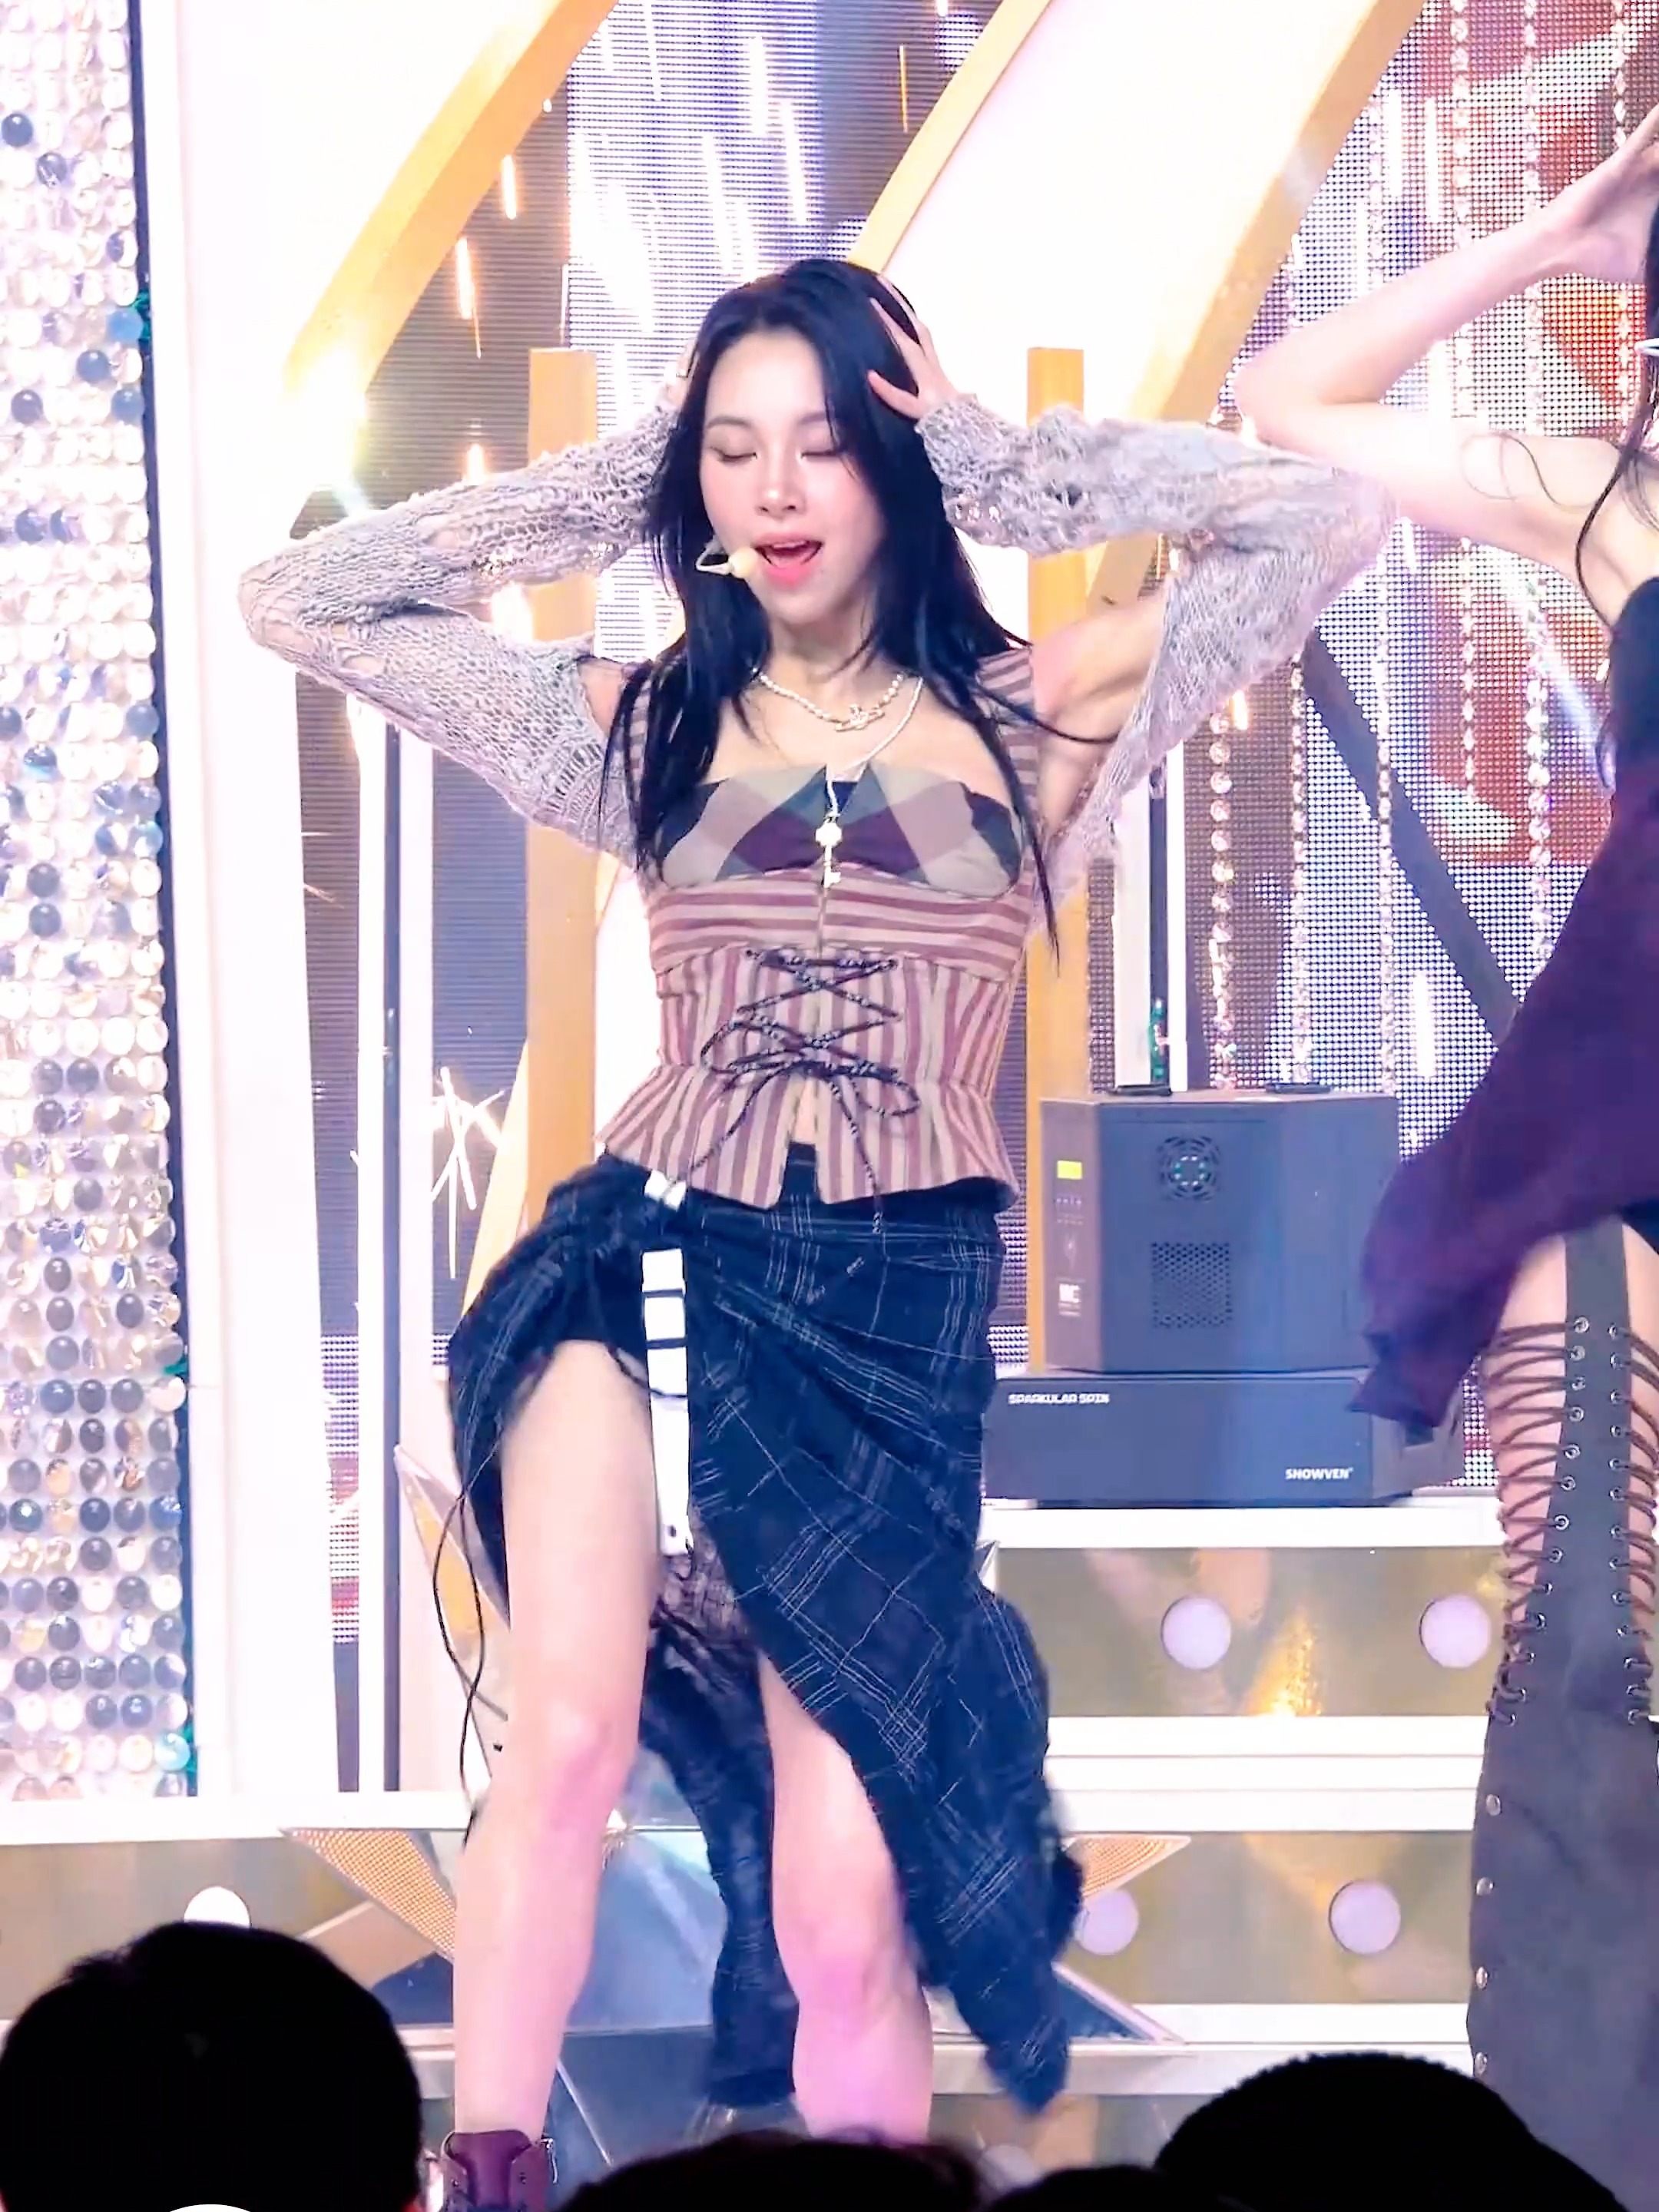 One Spark Chaeyoung fancam #twice #chaeyoung #fancam #fyp